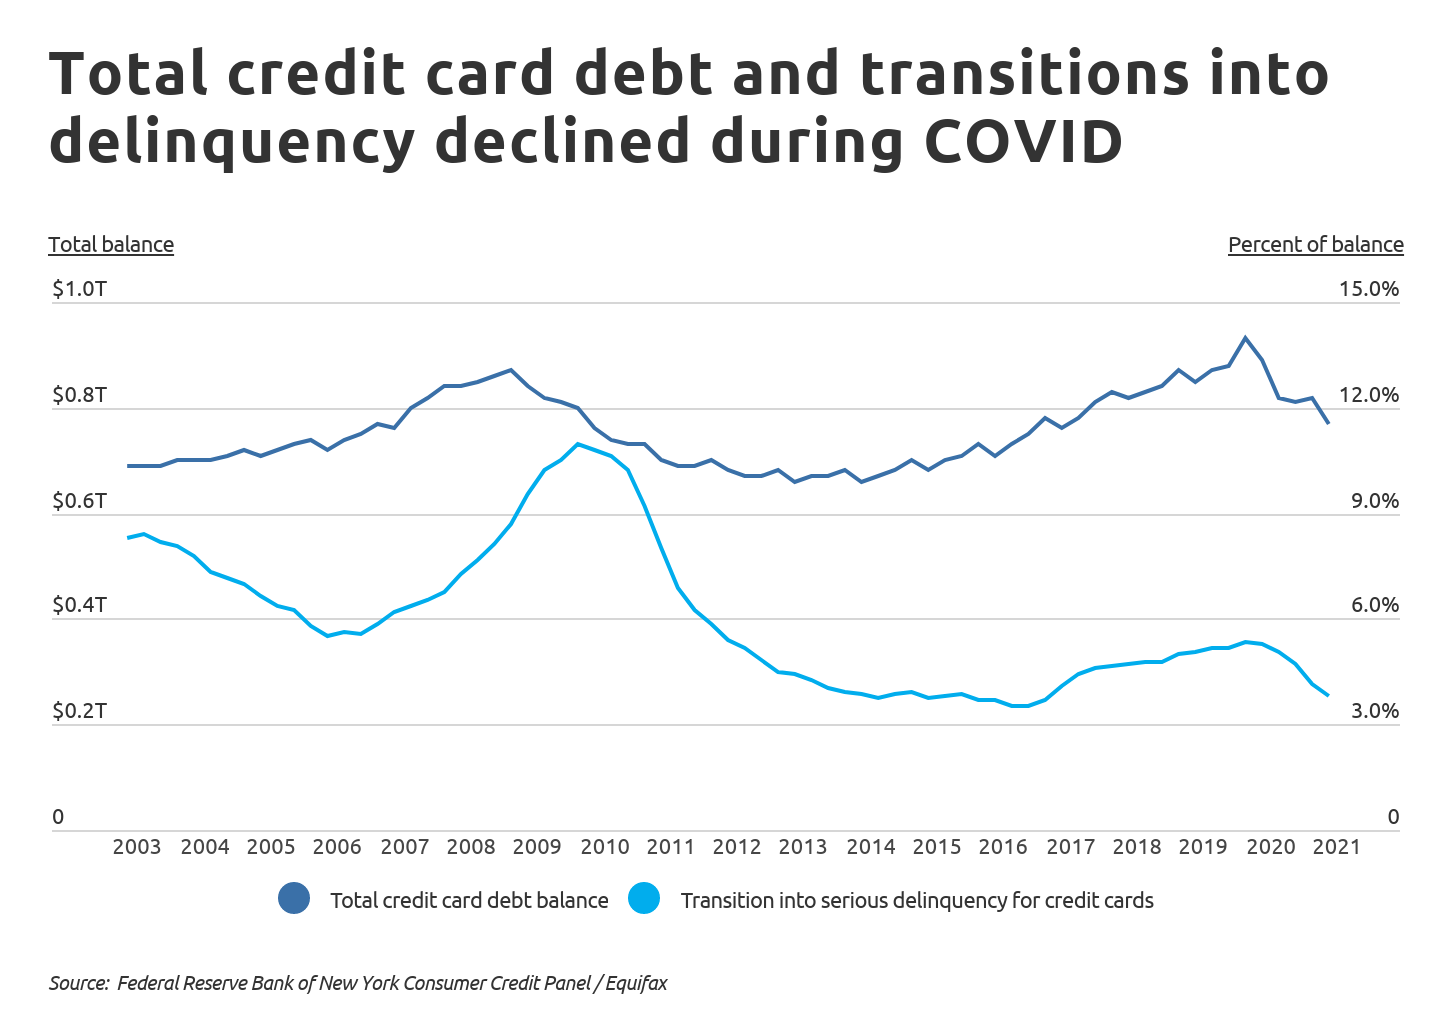 Total credit card debt and transitions into delinquency have declined